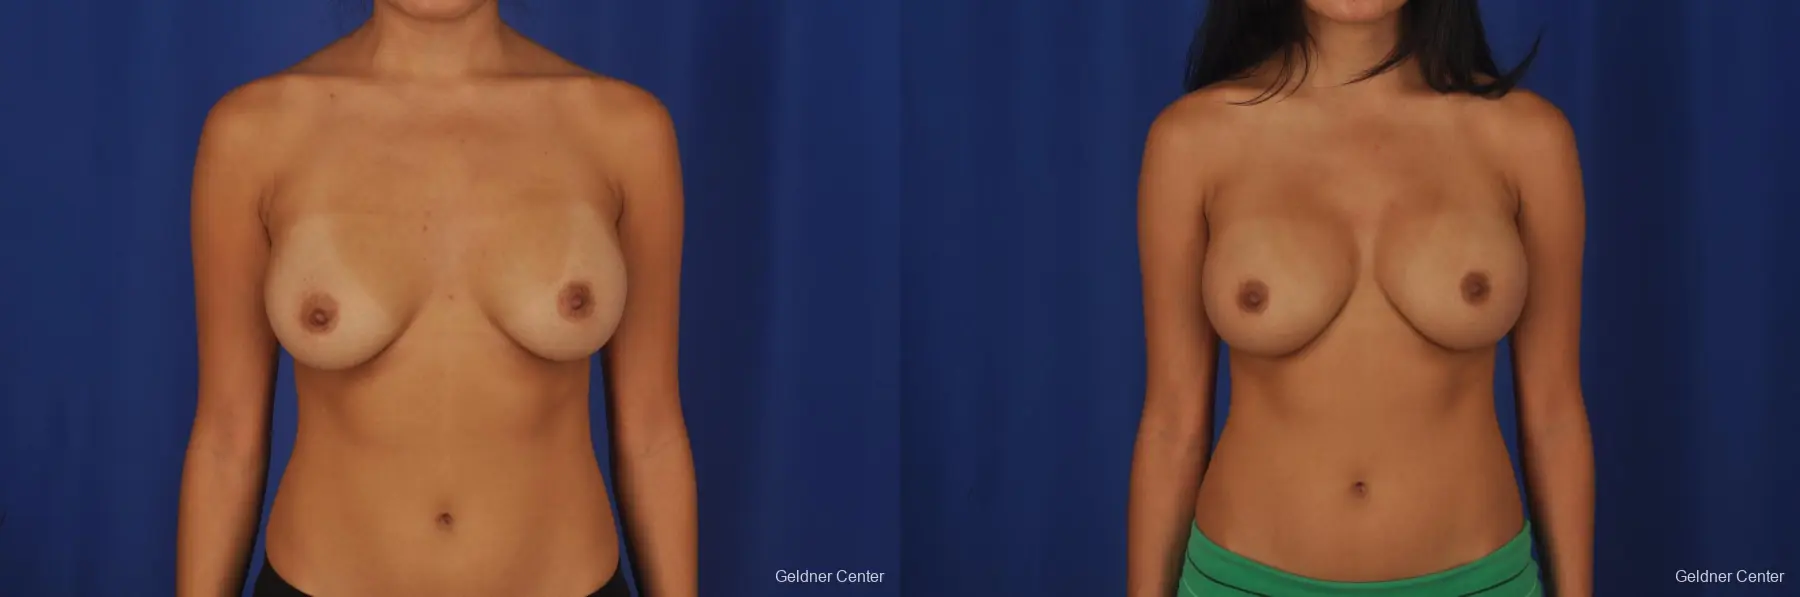 Breast Augmentation Streeterville, Chicago 2298 - Before and After 1